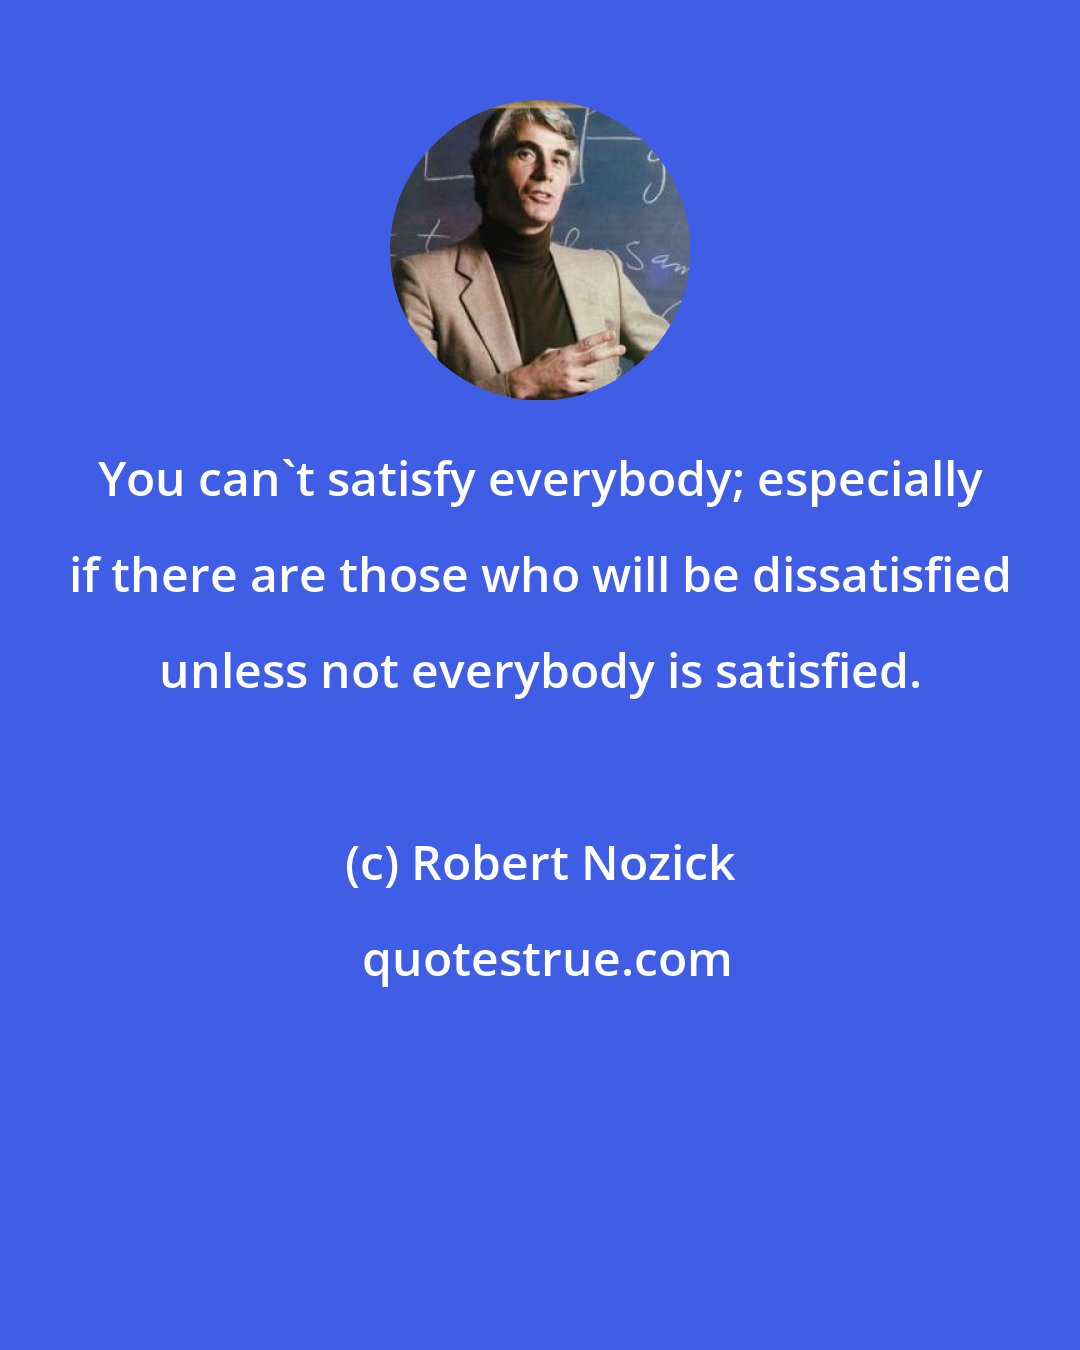 Robert Nozick: You can't satisfy everybody; especially if there are those who will be dissatisfied unless not everybody is satisfied.